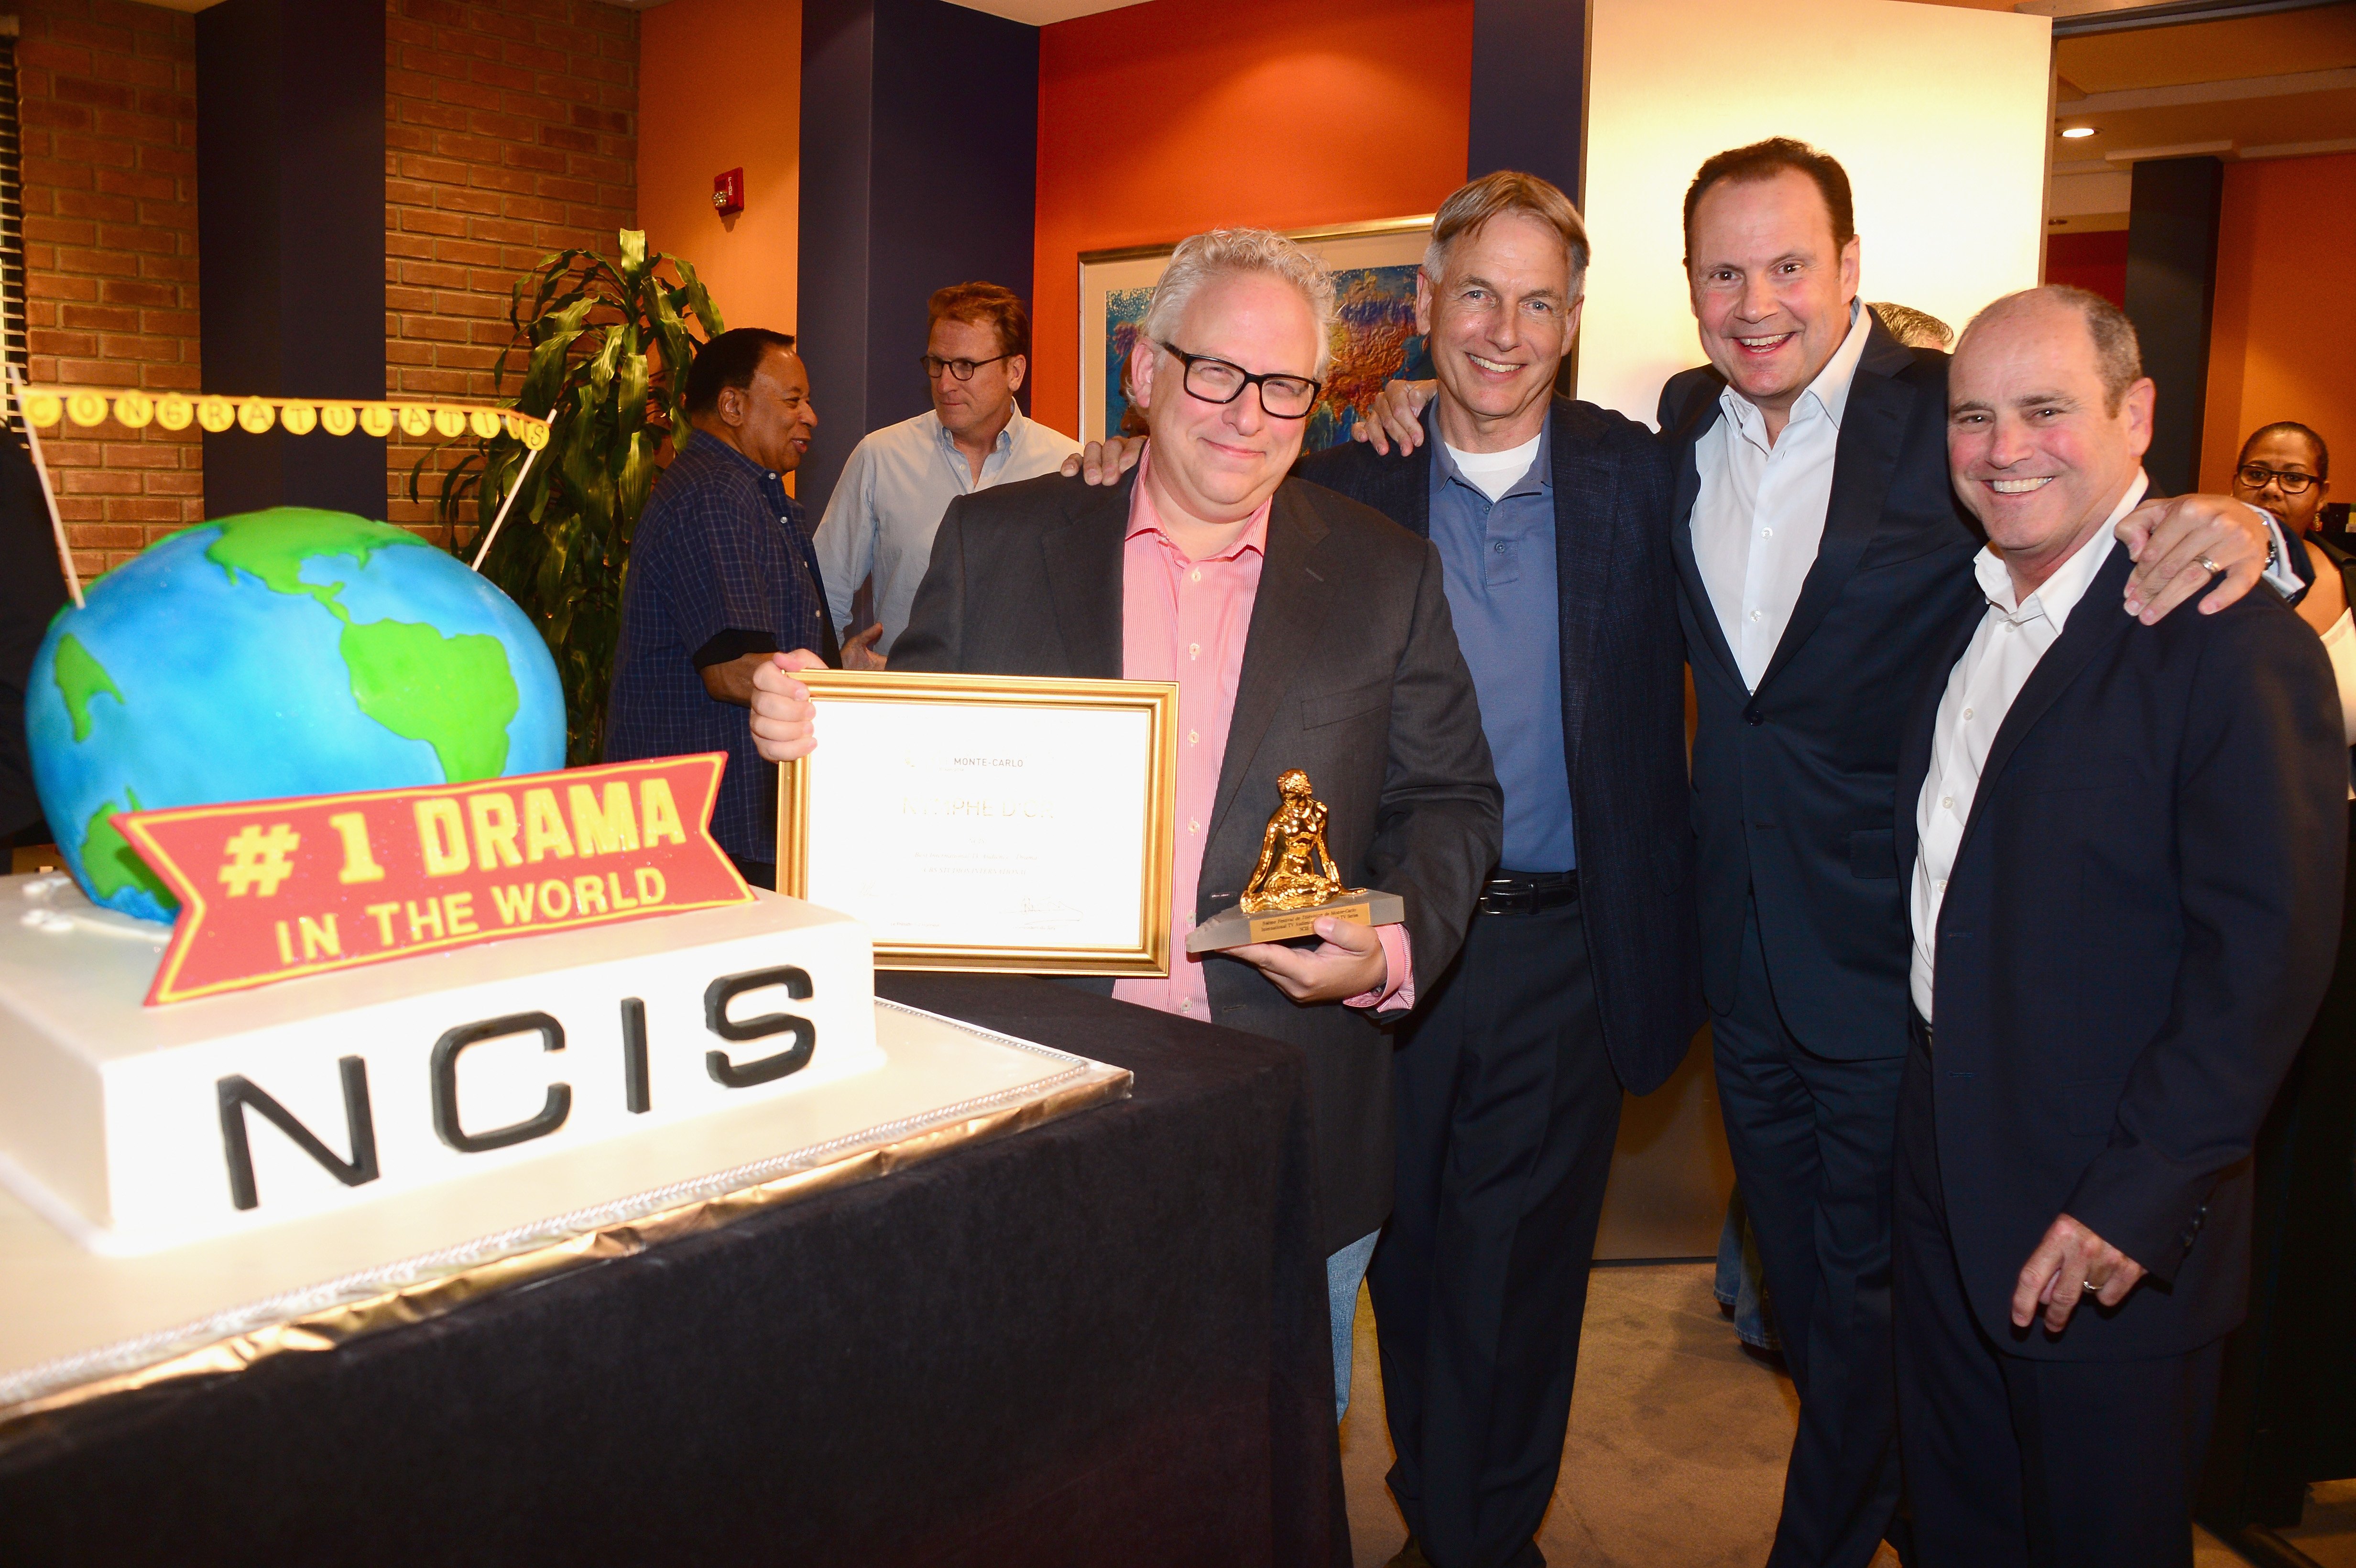 Gary Glasberg, Mark Harmon, Armando Nuñez and CBS Paramount president David Stapf celebrate "NCIS" being named he most-watched drama in the World after receiving the International TV Audience Award at Monte-Carlo Television Festival on August 7, 2014 in Valencia, California | Photo: Getty Images